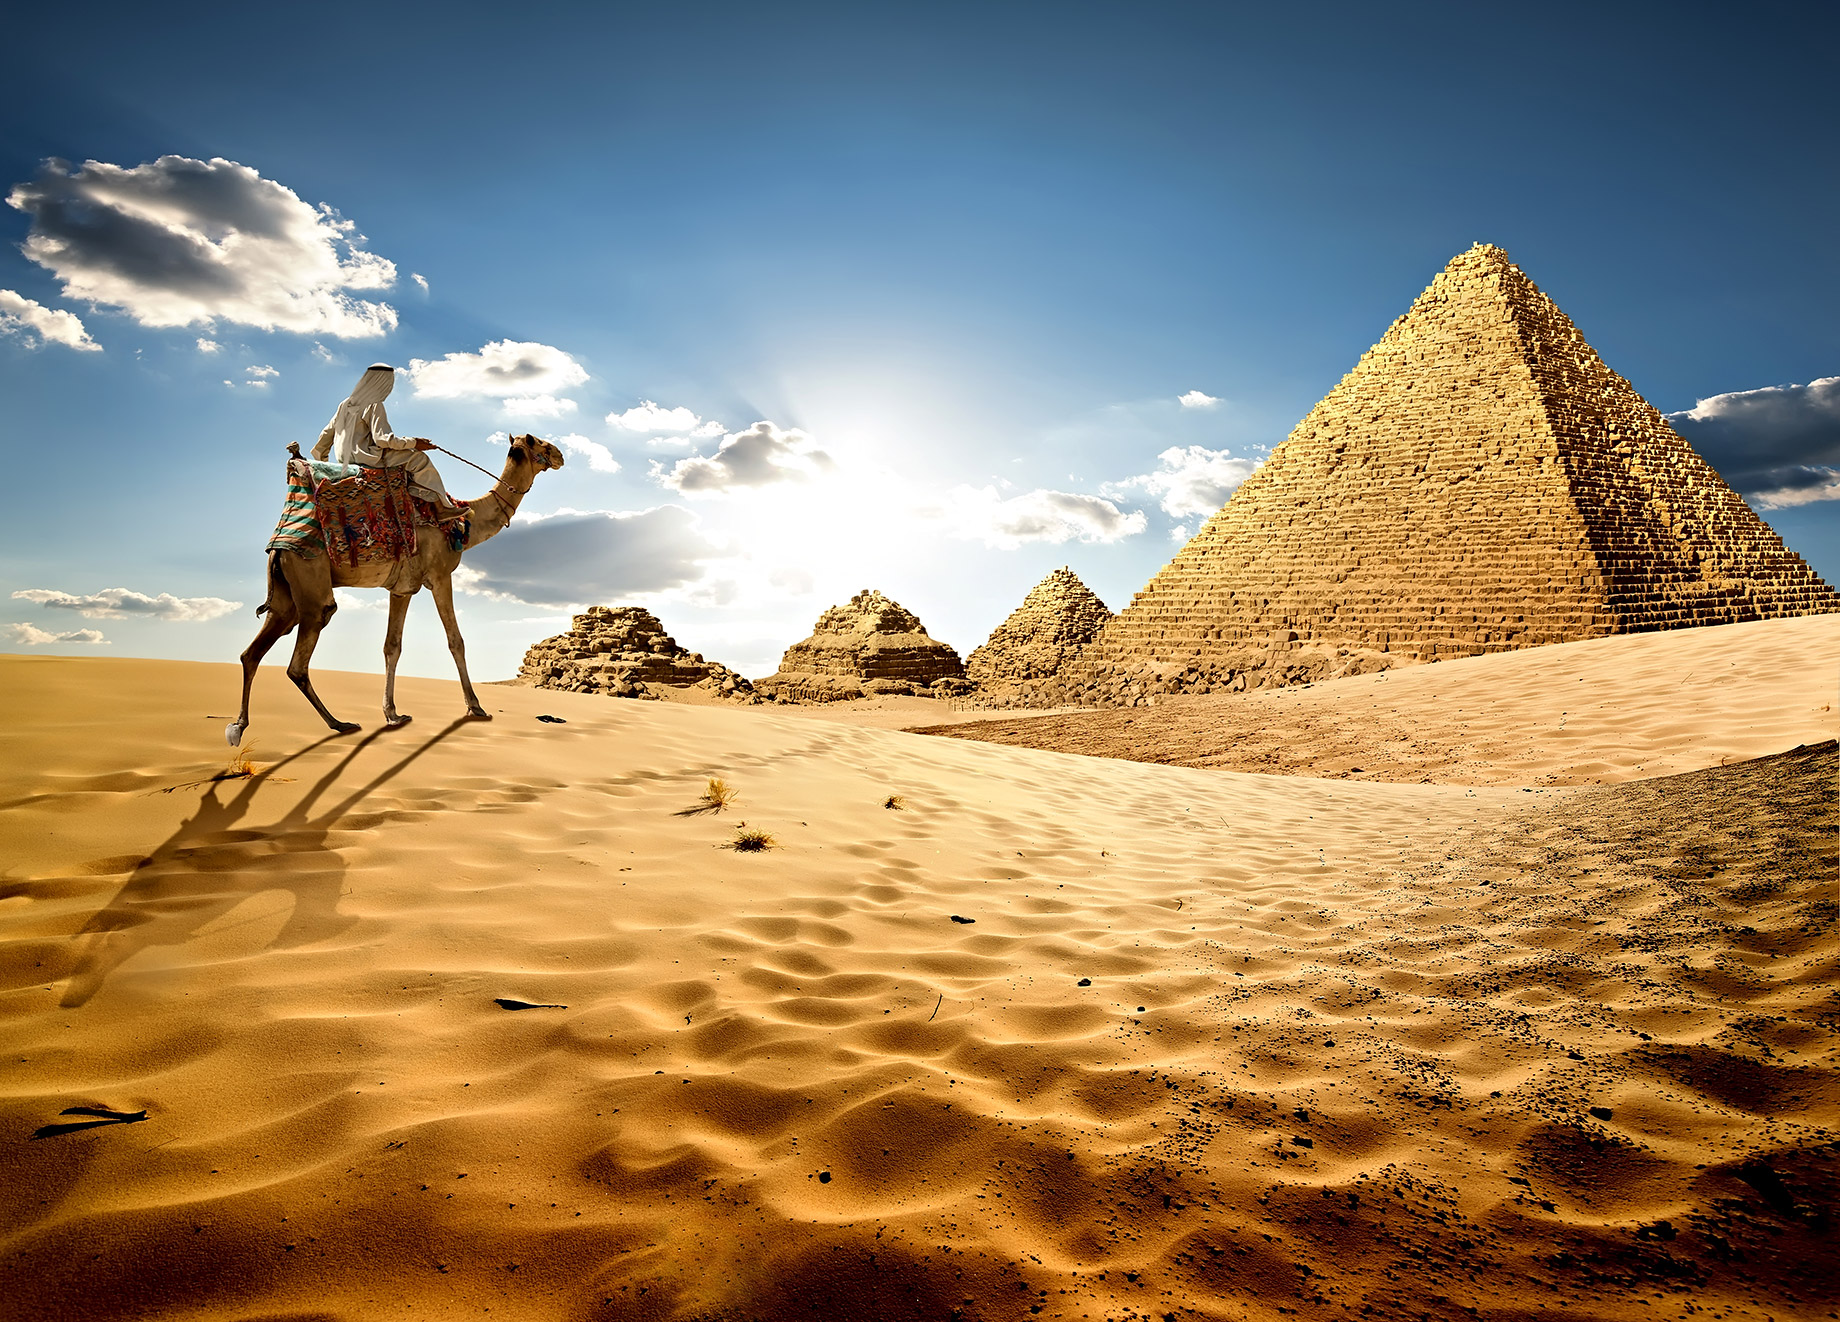 Digital Nomad Riding a Camel to The Great Pyramids of Giza, Egypt